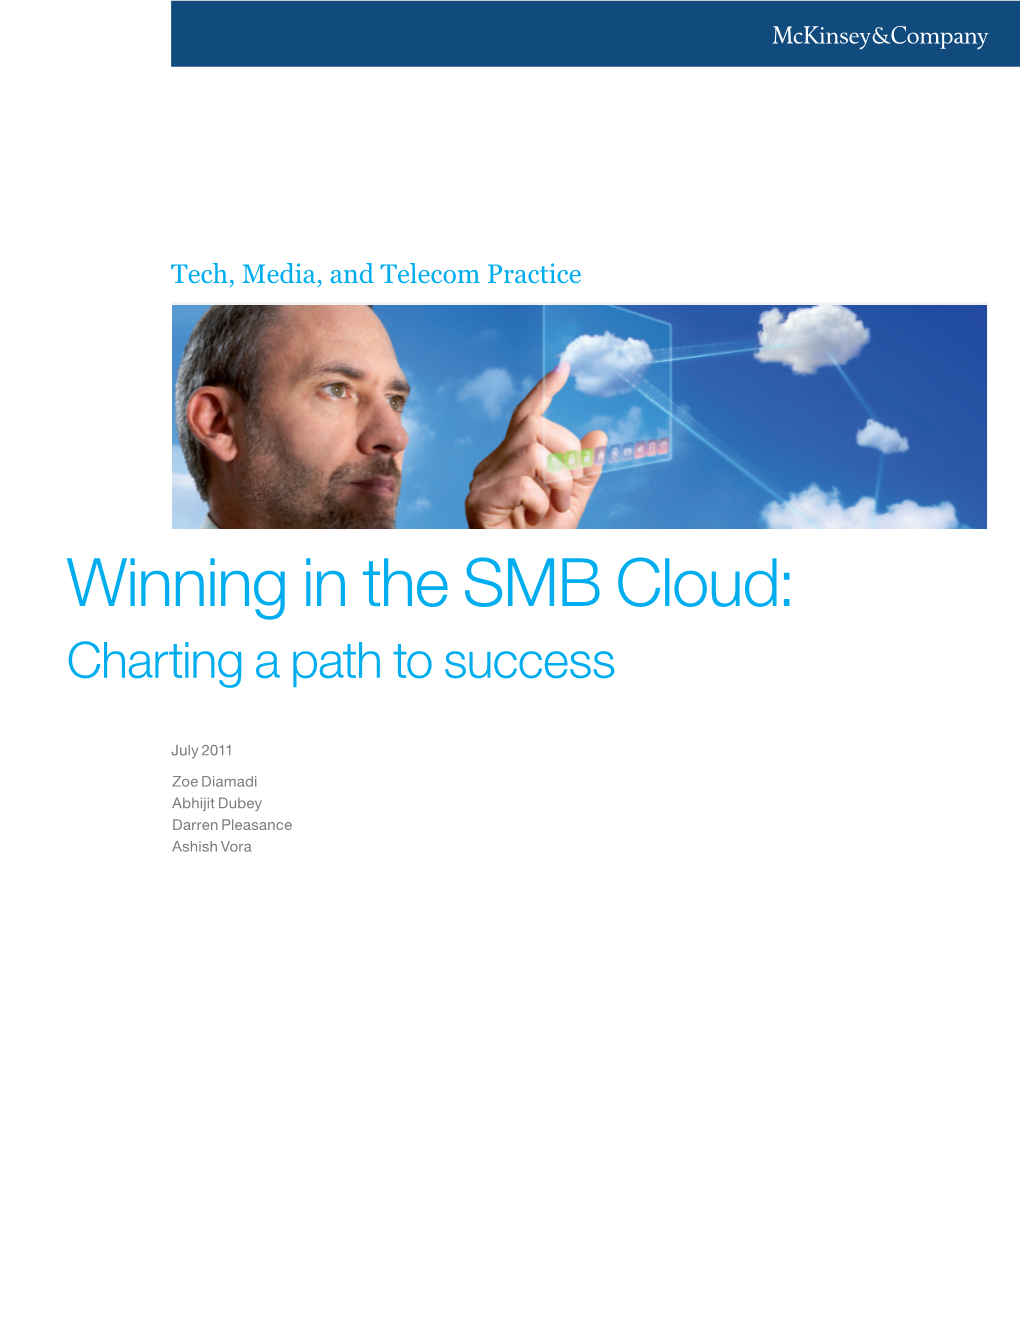 Winning in the SMB Cloud: Charting a Path to Success